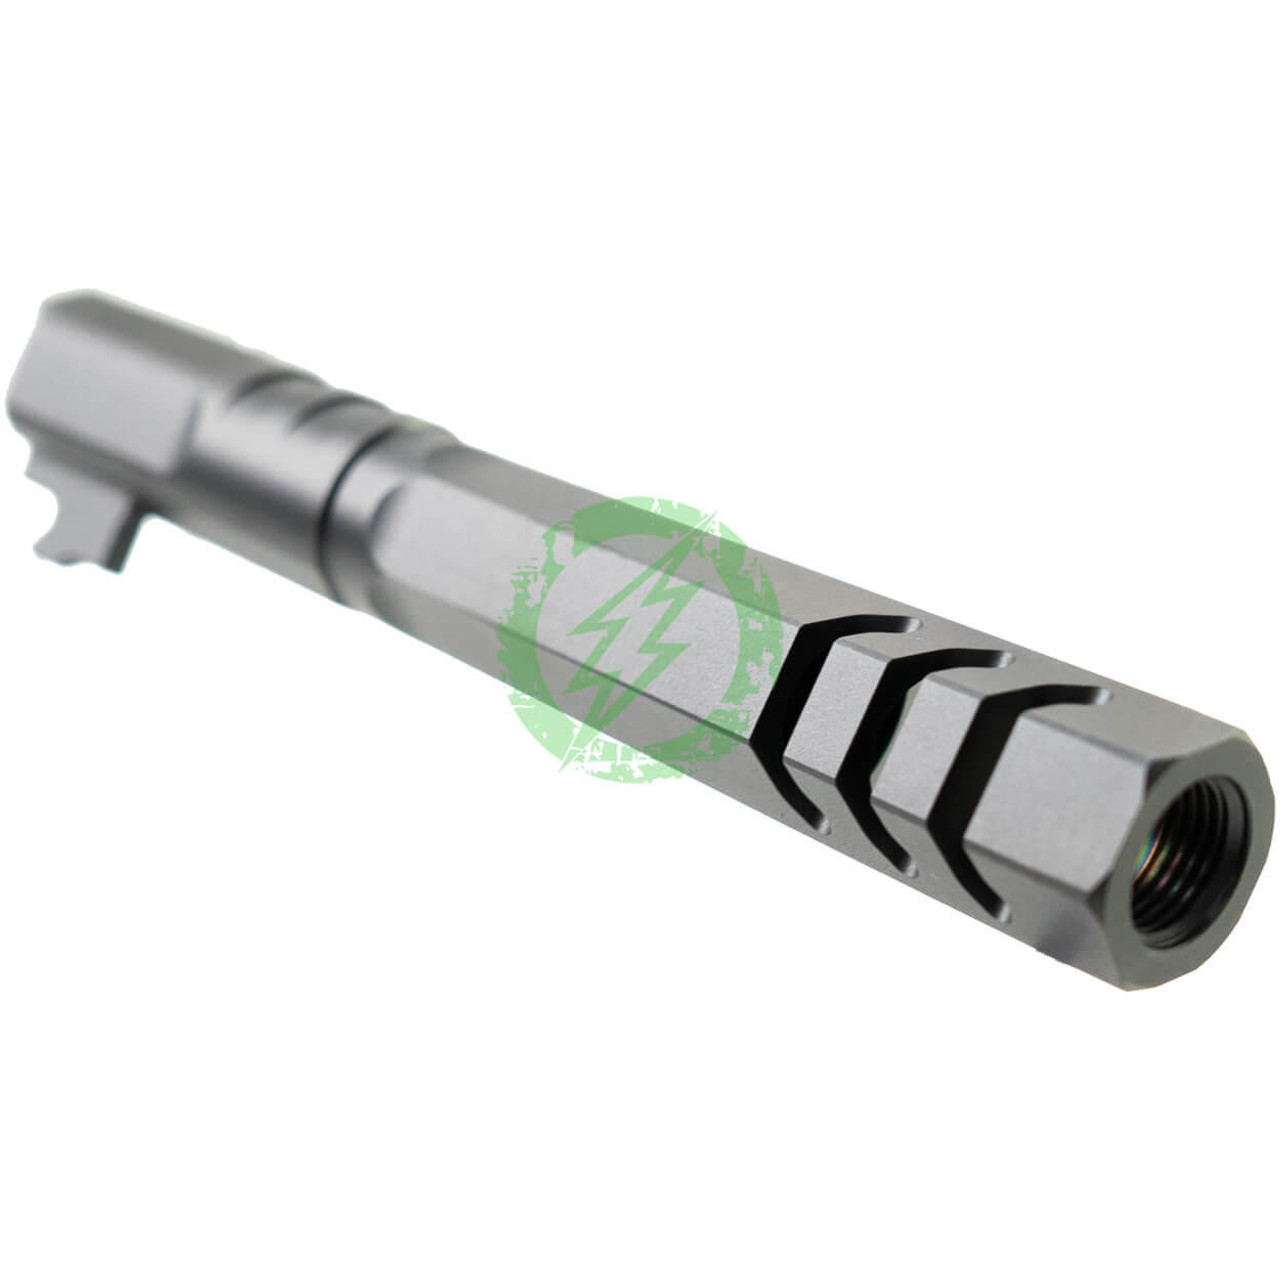 Airsoft Masterpiece Custom EDGE HEXA Stainless Steel Outer Barrel for HI-CAPA 5.1 